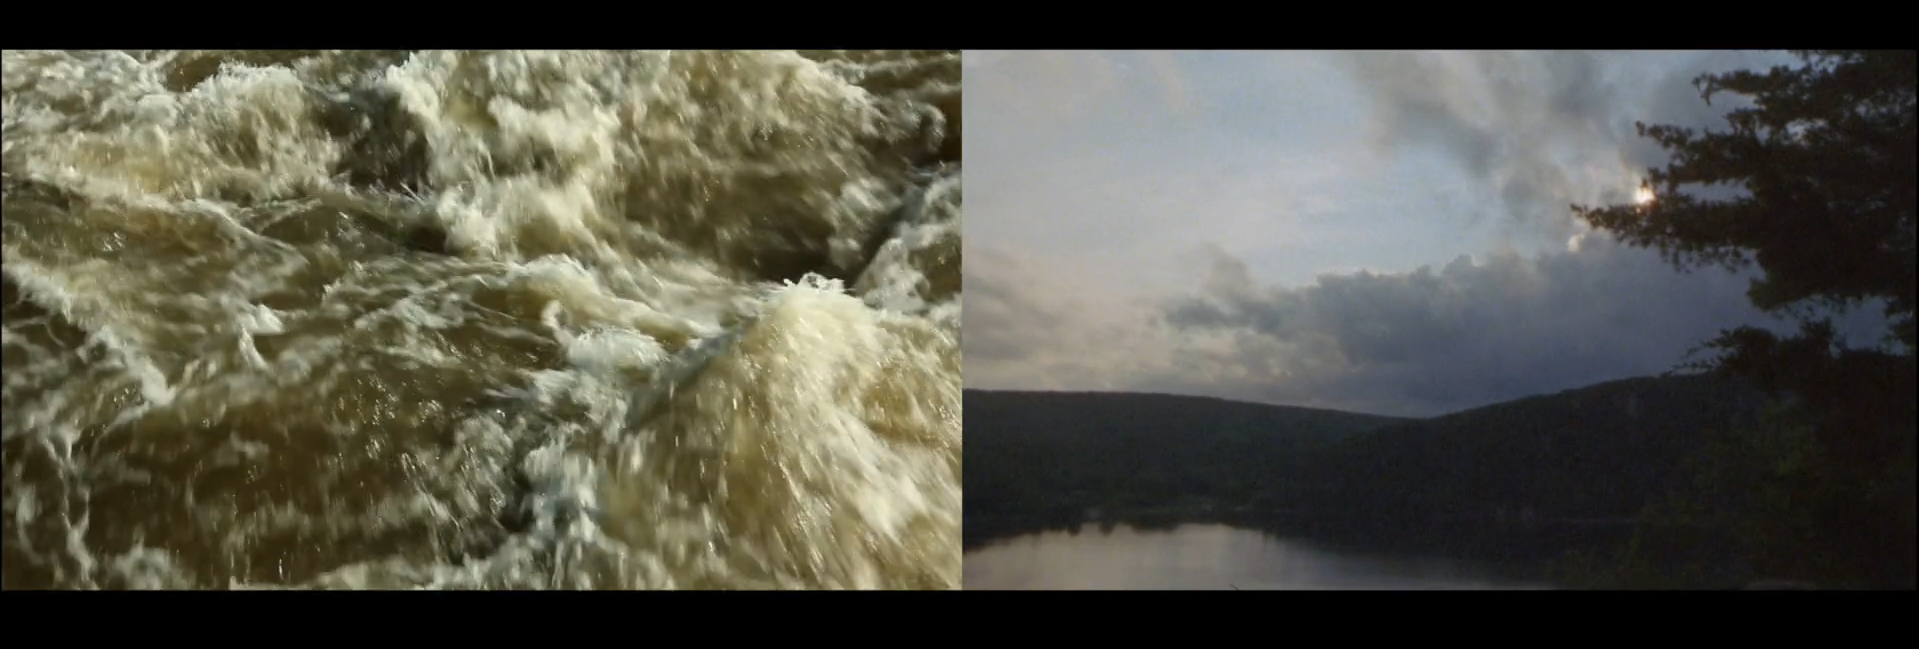 A dual screen capture of a film depicting rushing water on the left and a serene lakeside view on the right.